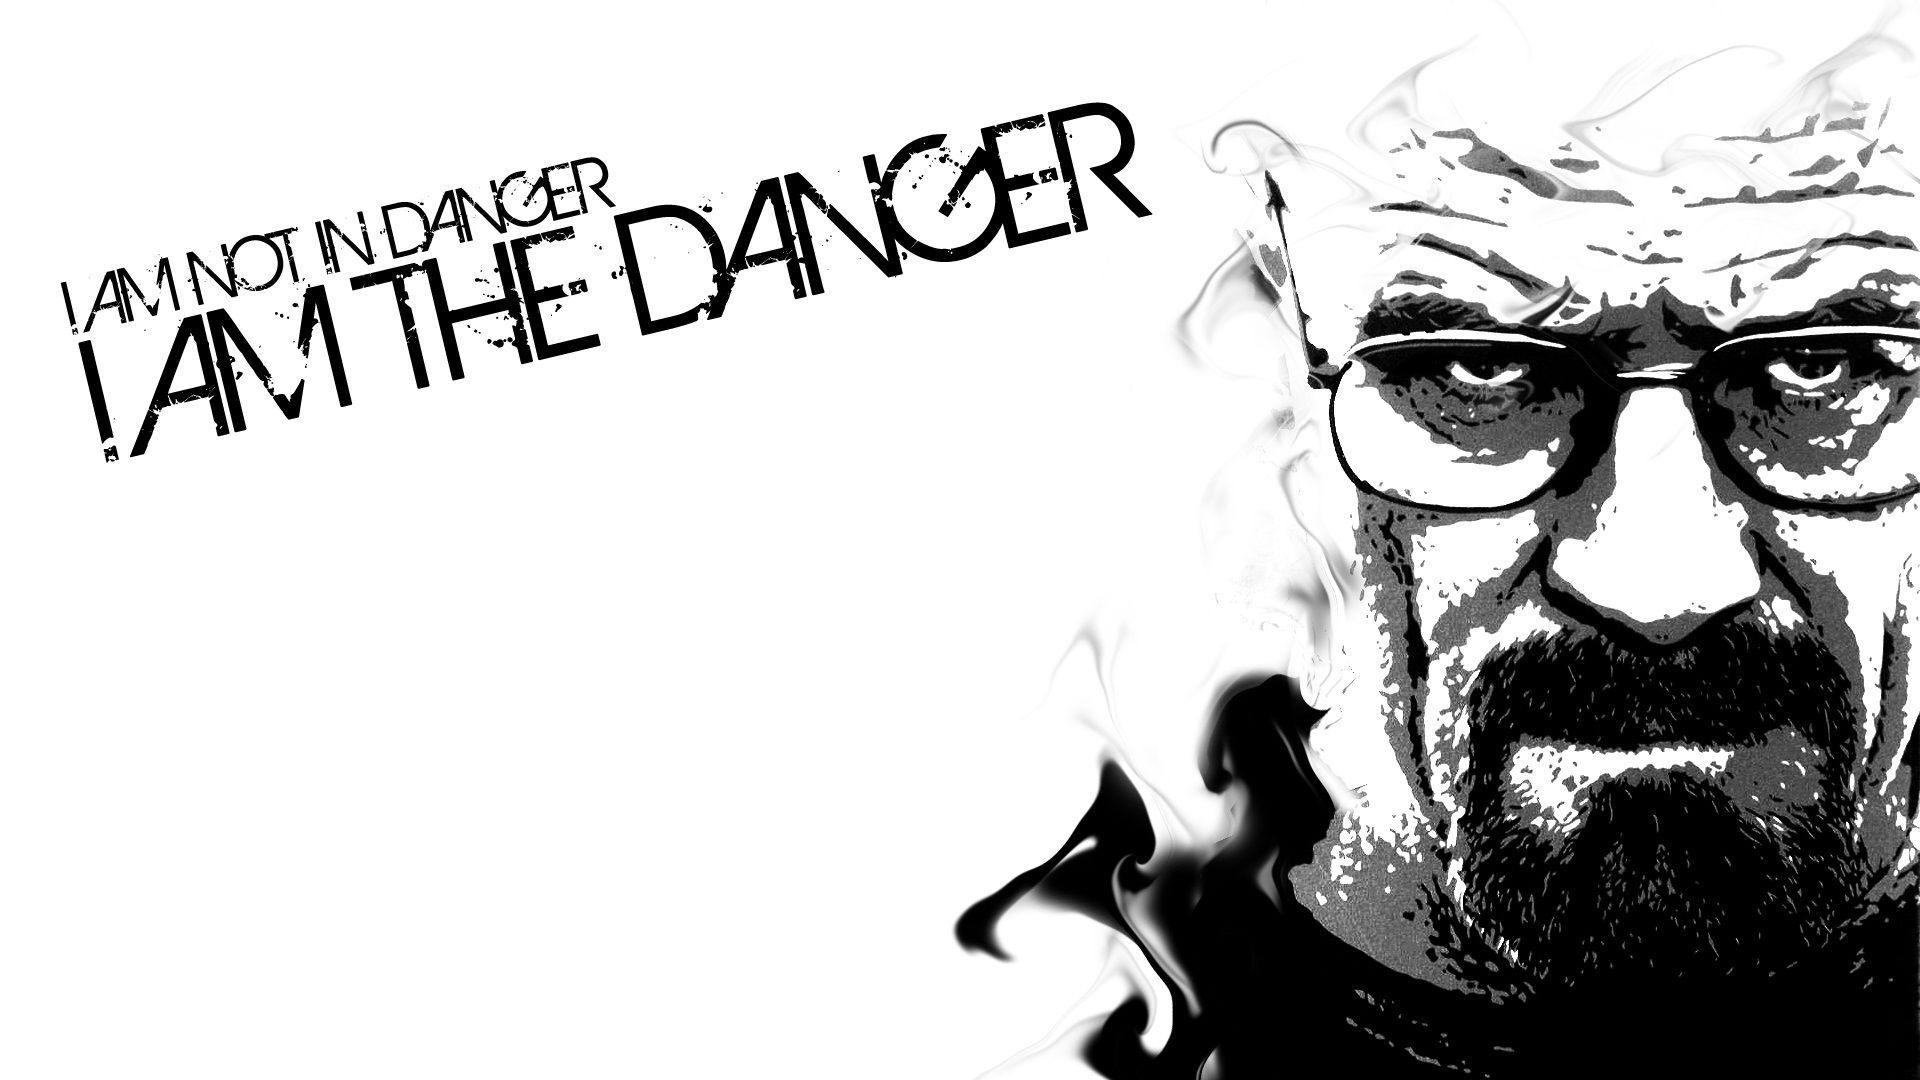 Breaking Dangerous Wallpaper: You can get most recent and also HD Awesome and Amusing Wallpaper as well as Quotes, Memes, Bollywood Wa. Breaking bad seasons, Breaking bad, Breaking bad cast